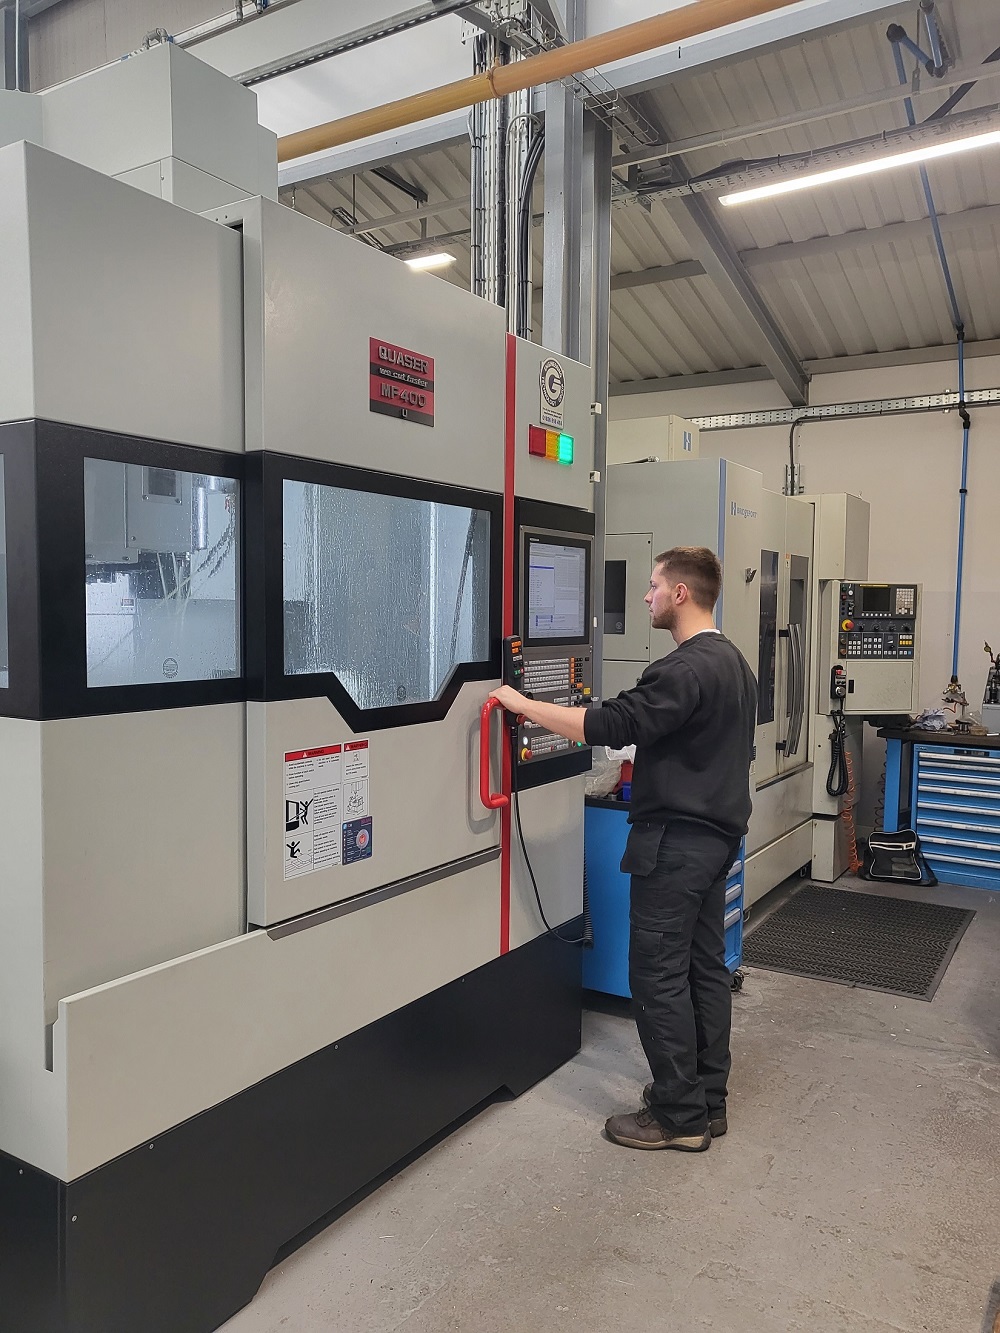 Subcontractor gets into gear with Quaser machine